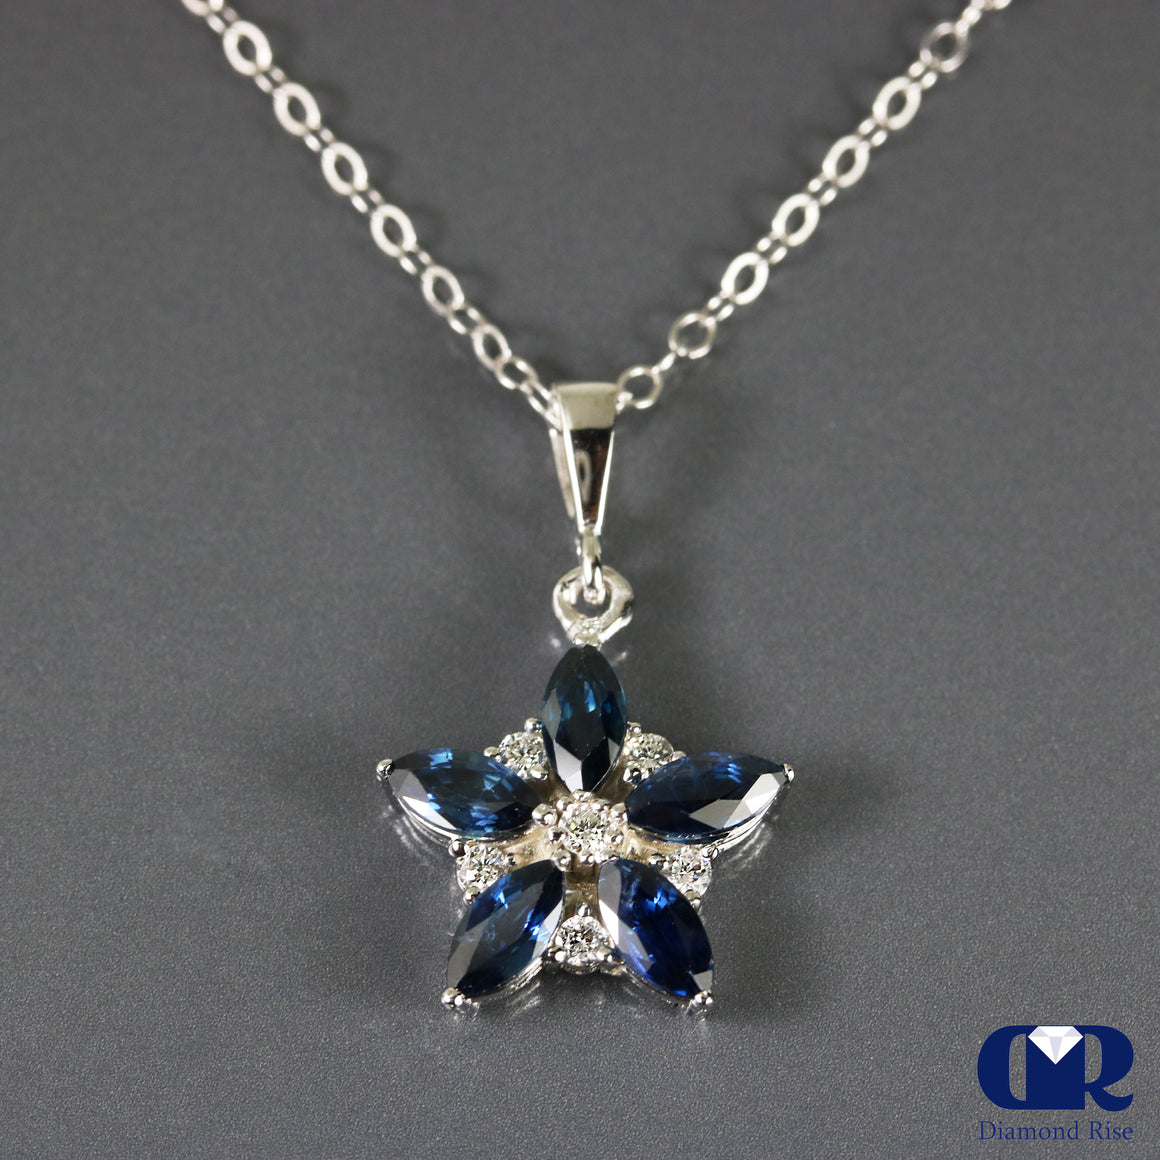 Natural 1.89 Ct Diamond & Sapphire Pendant In 14K Gold With 16" Chain - Diamond Rise Jewelry